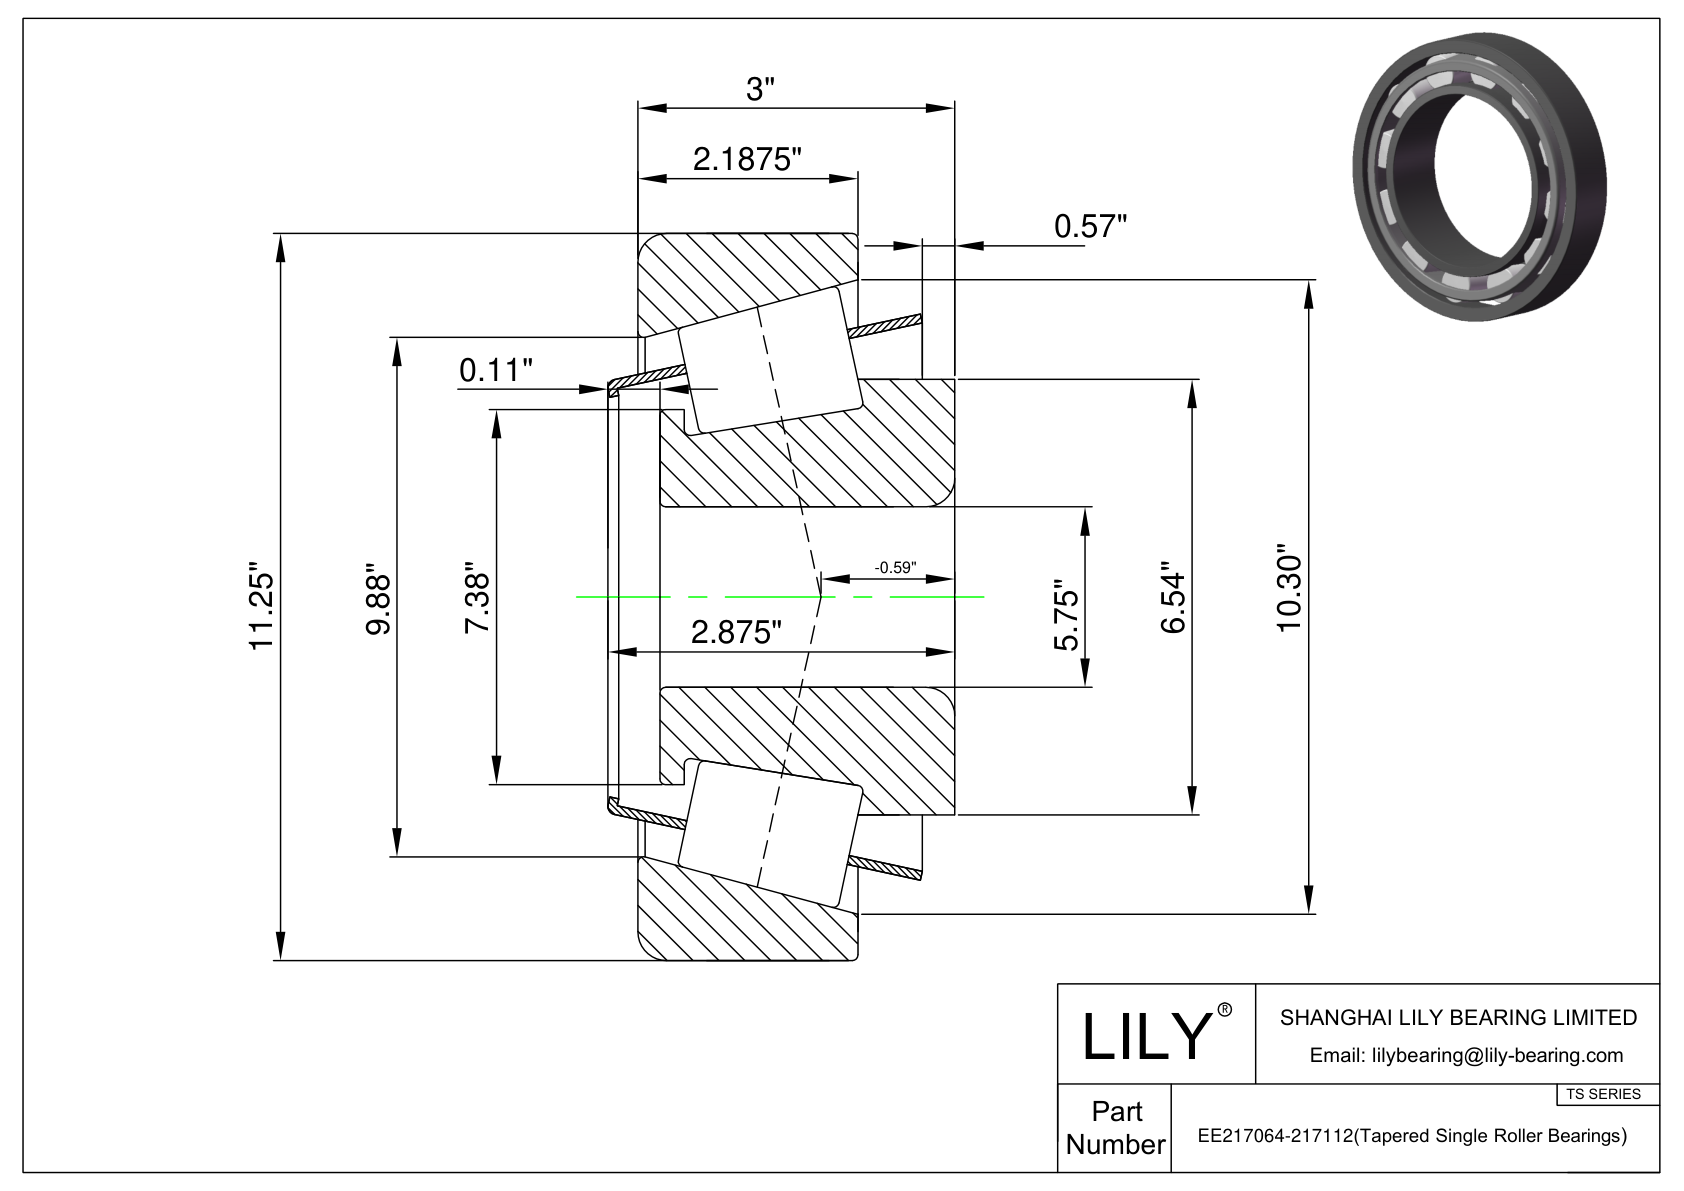 EE217064-217112 TS (Tapered Single Roller Bearings) (Imperial) cad drawing